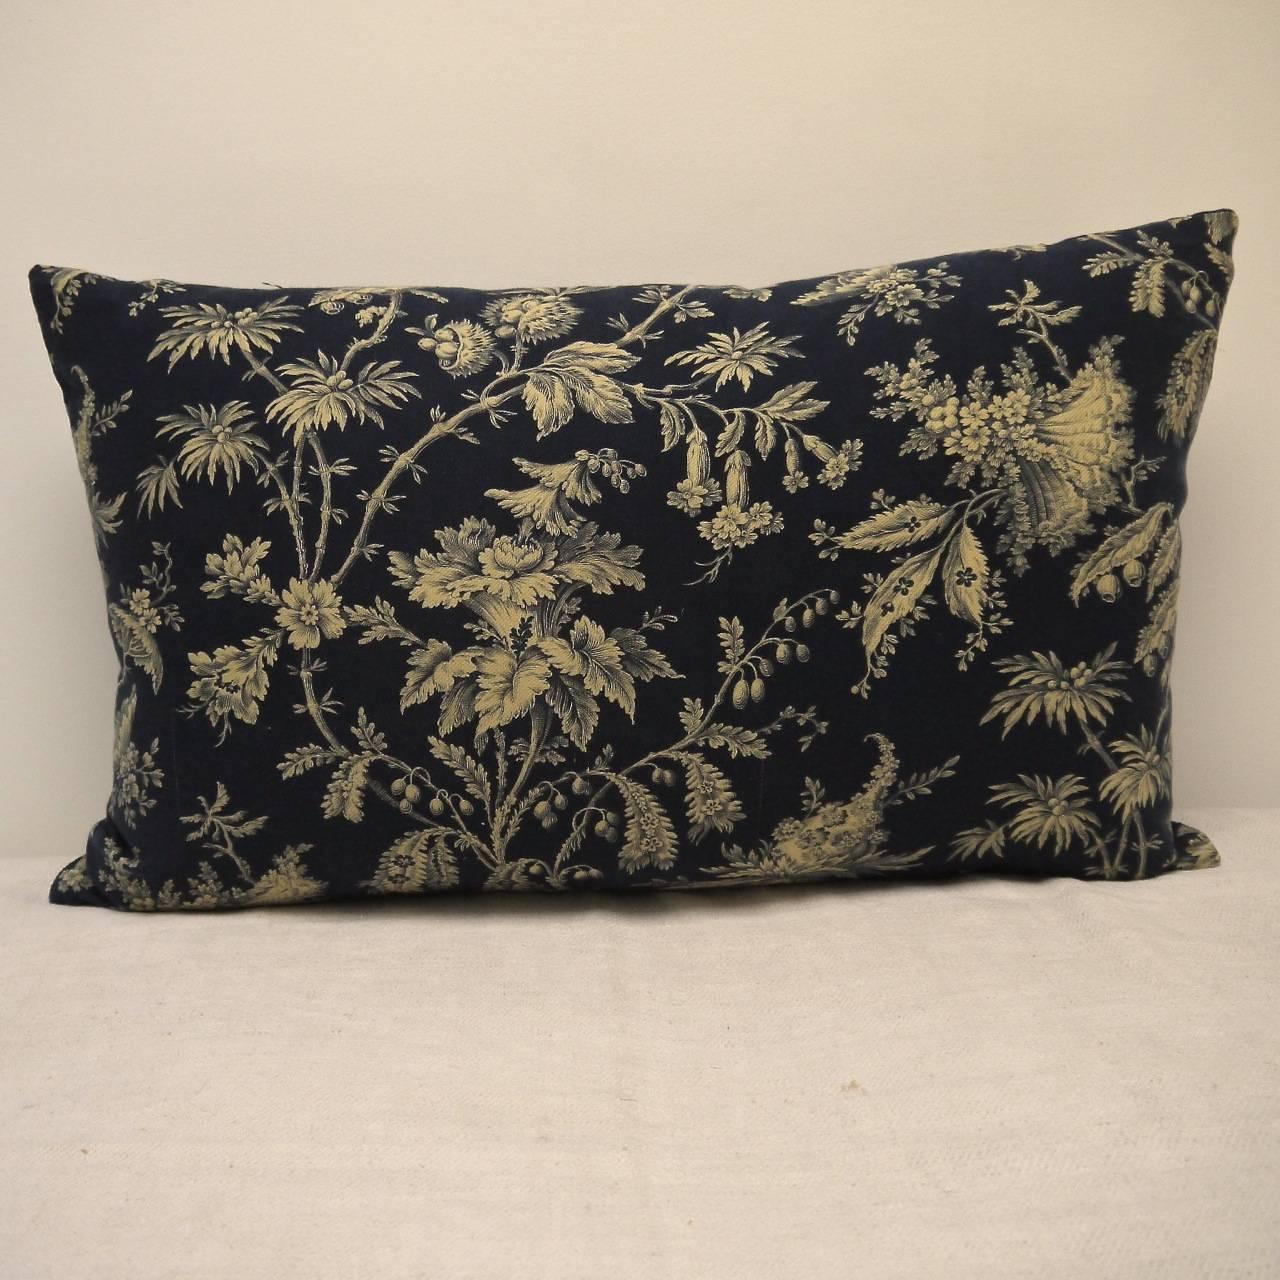 French printed cotton cushion. Printed with a design of exotic flowers and meandering branches on a textured cotton. Backed in a dyed blue/black linen and slipstitched closed with a duck feather insert, circa 1870s.